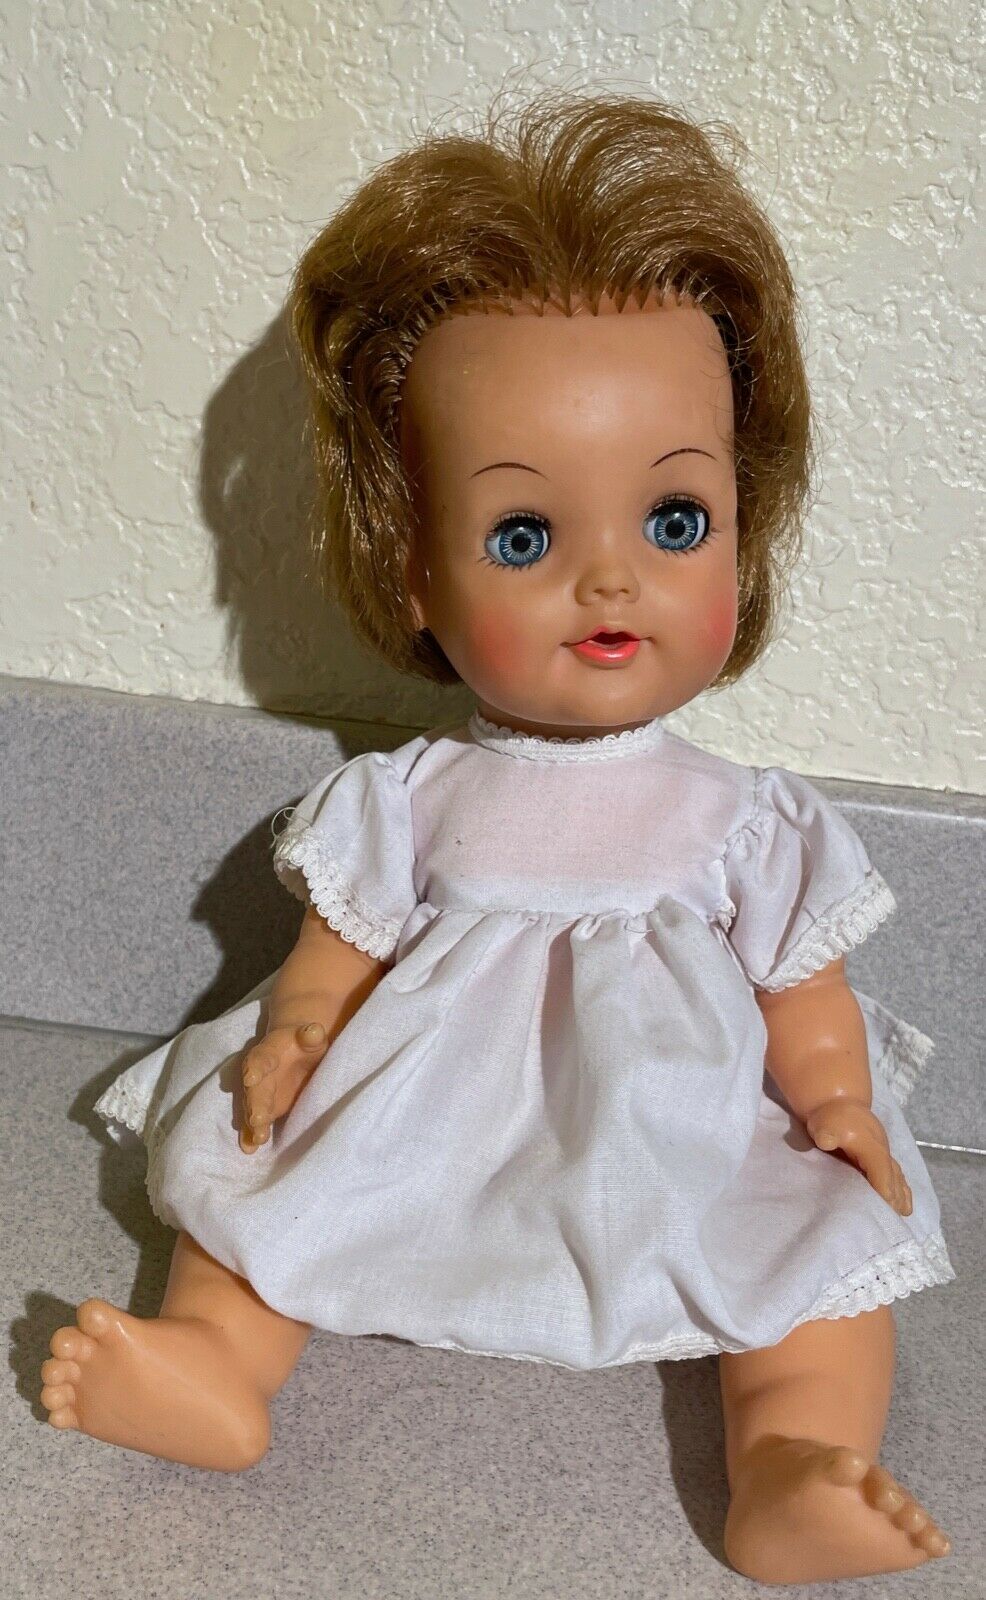 1965  Betsy Wetsy Baby Doll  Ideal Toy 1960's   12 Inch          Jsb3